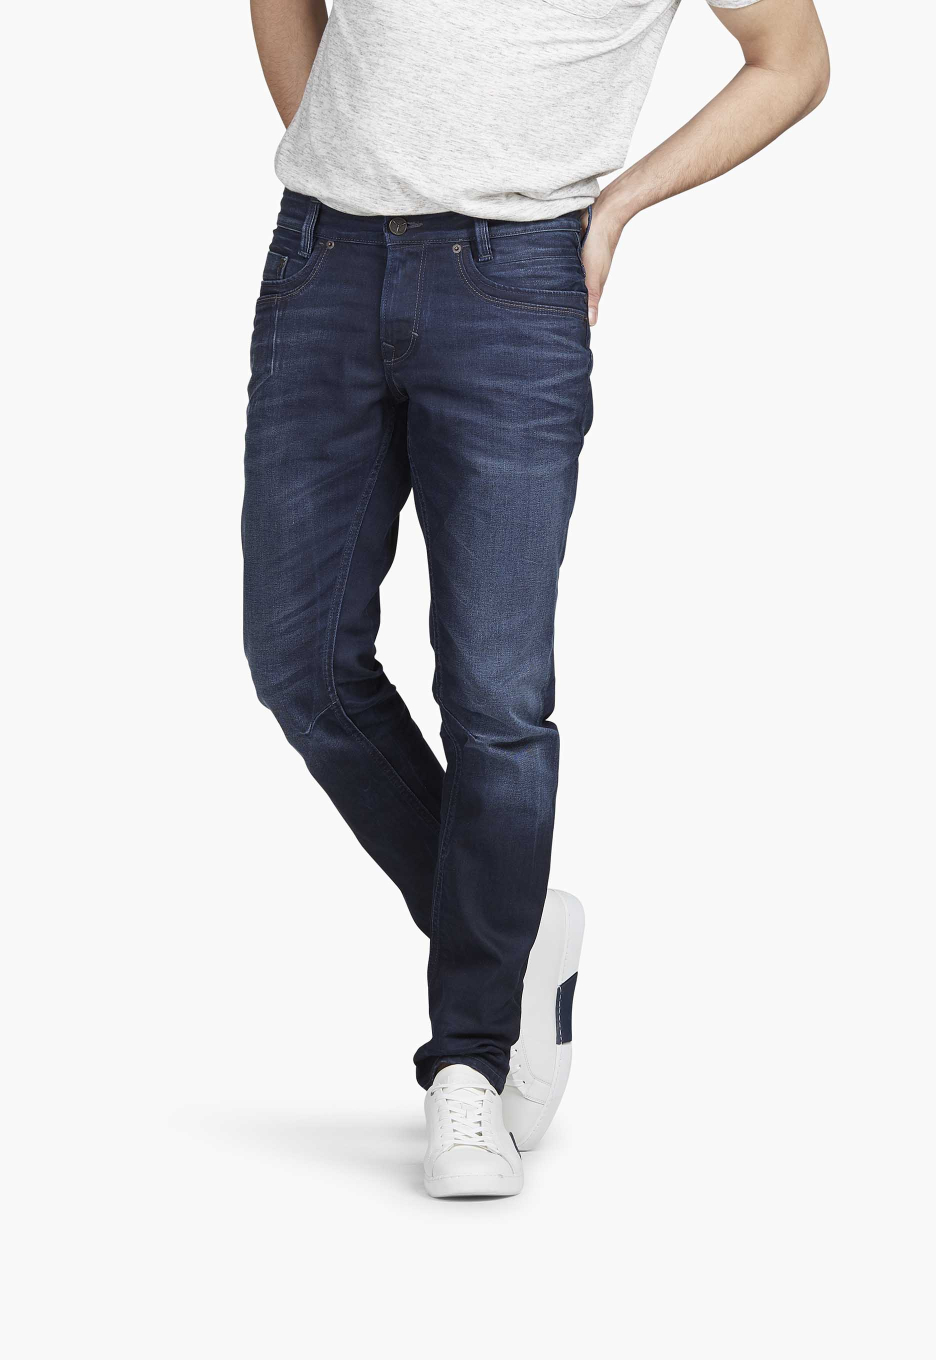 PME LEGEND Tapered Jeans OPEN32.nl